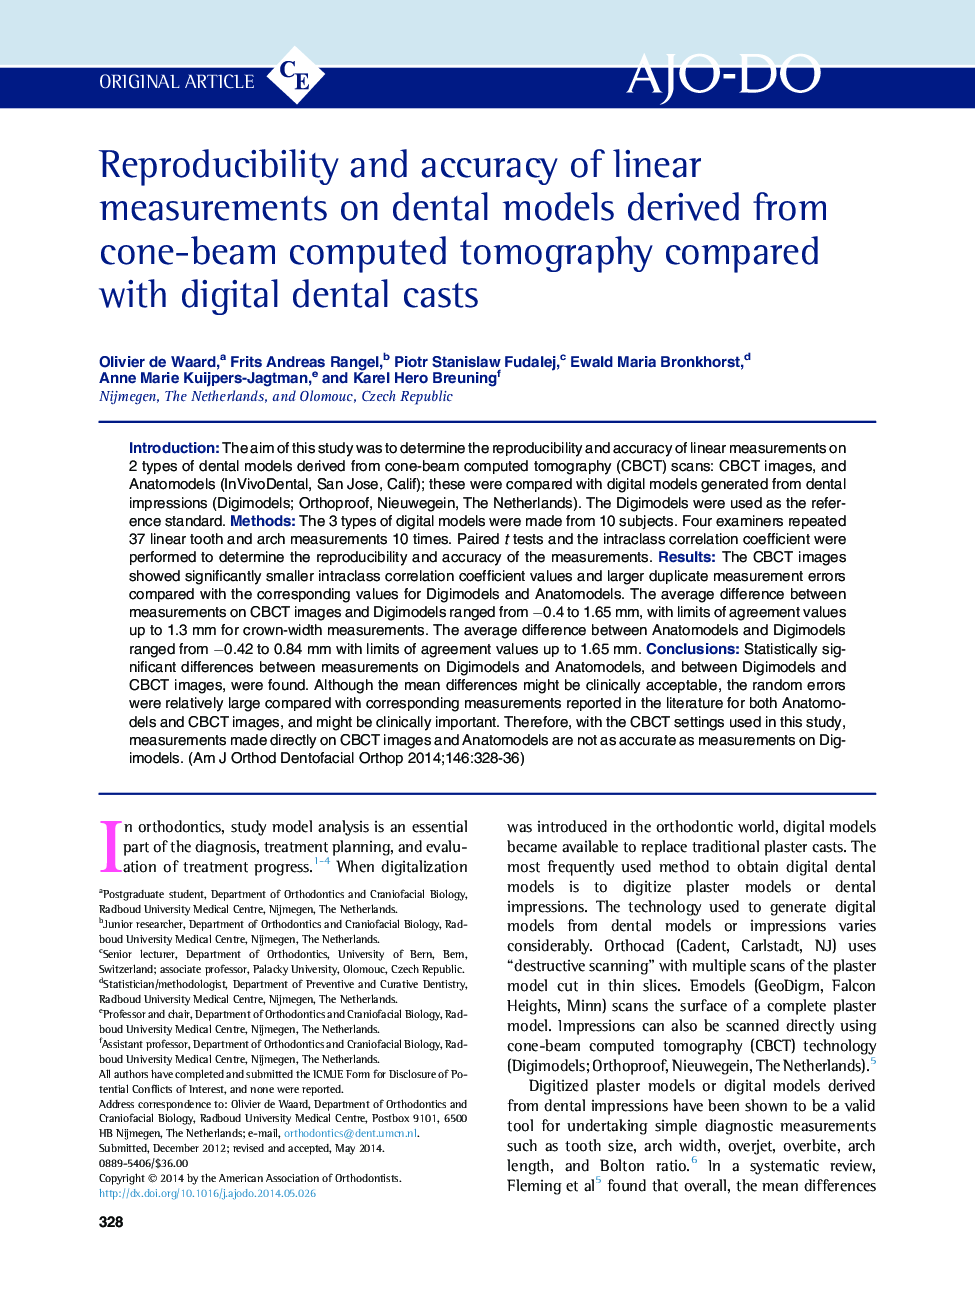 Reproducibility and accuracy of linear measurements on dental models derived from cone-beam computed tomography compared with digital dental casts 